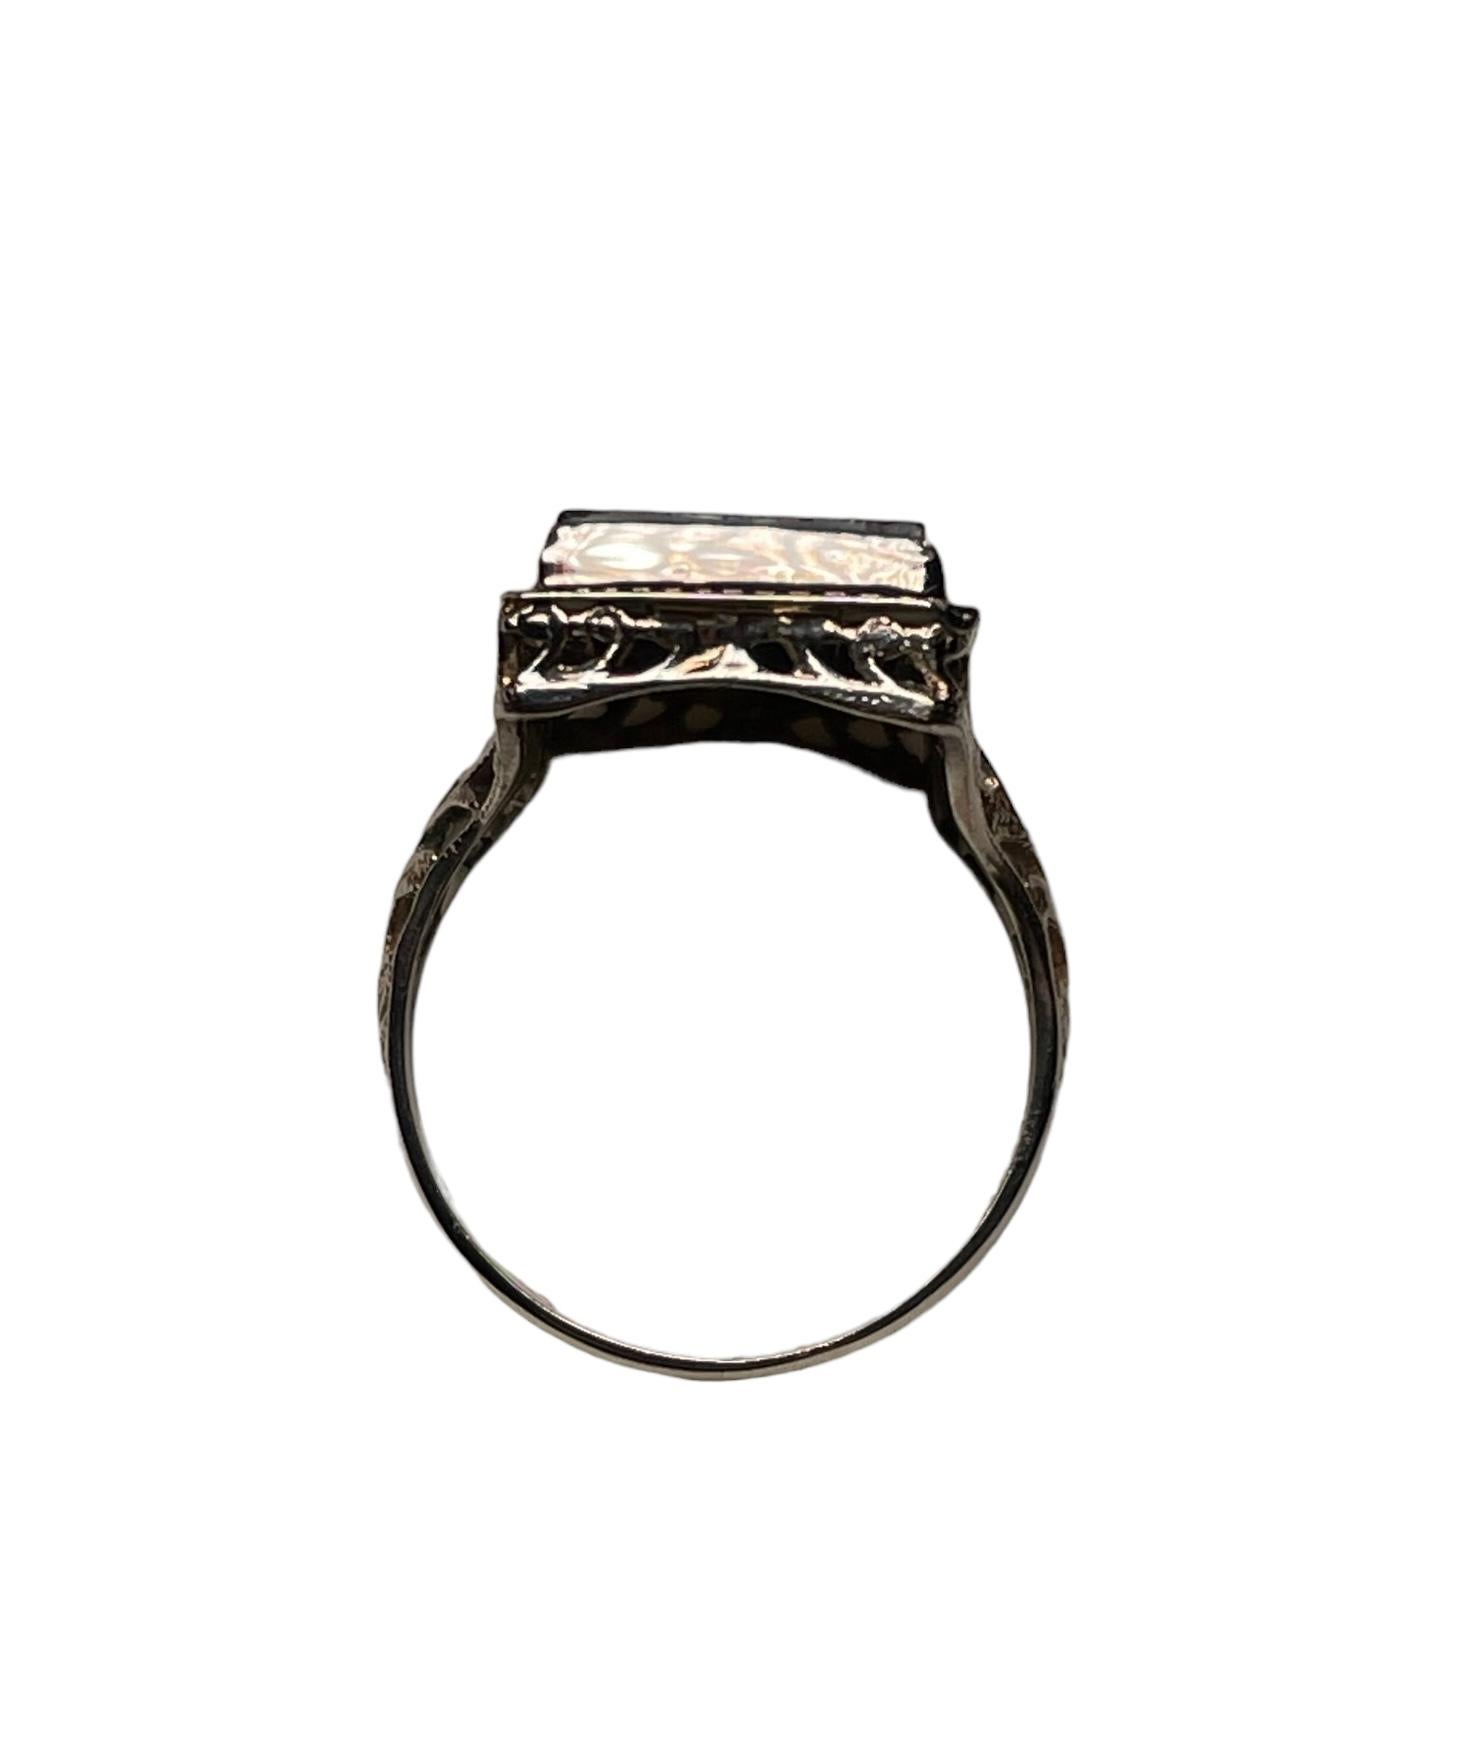 Art Deco 14k White Gold, Diamond and Onyx Cocktail Ring For Sale 4